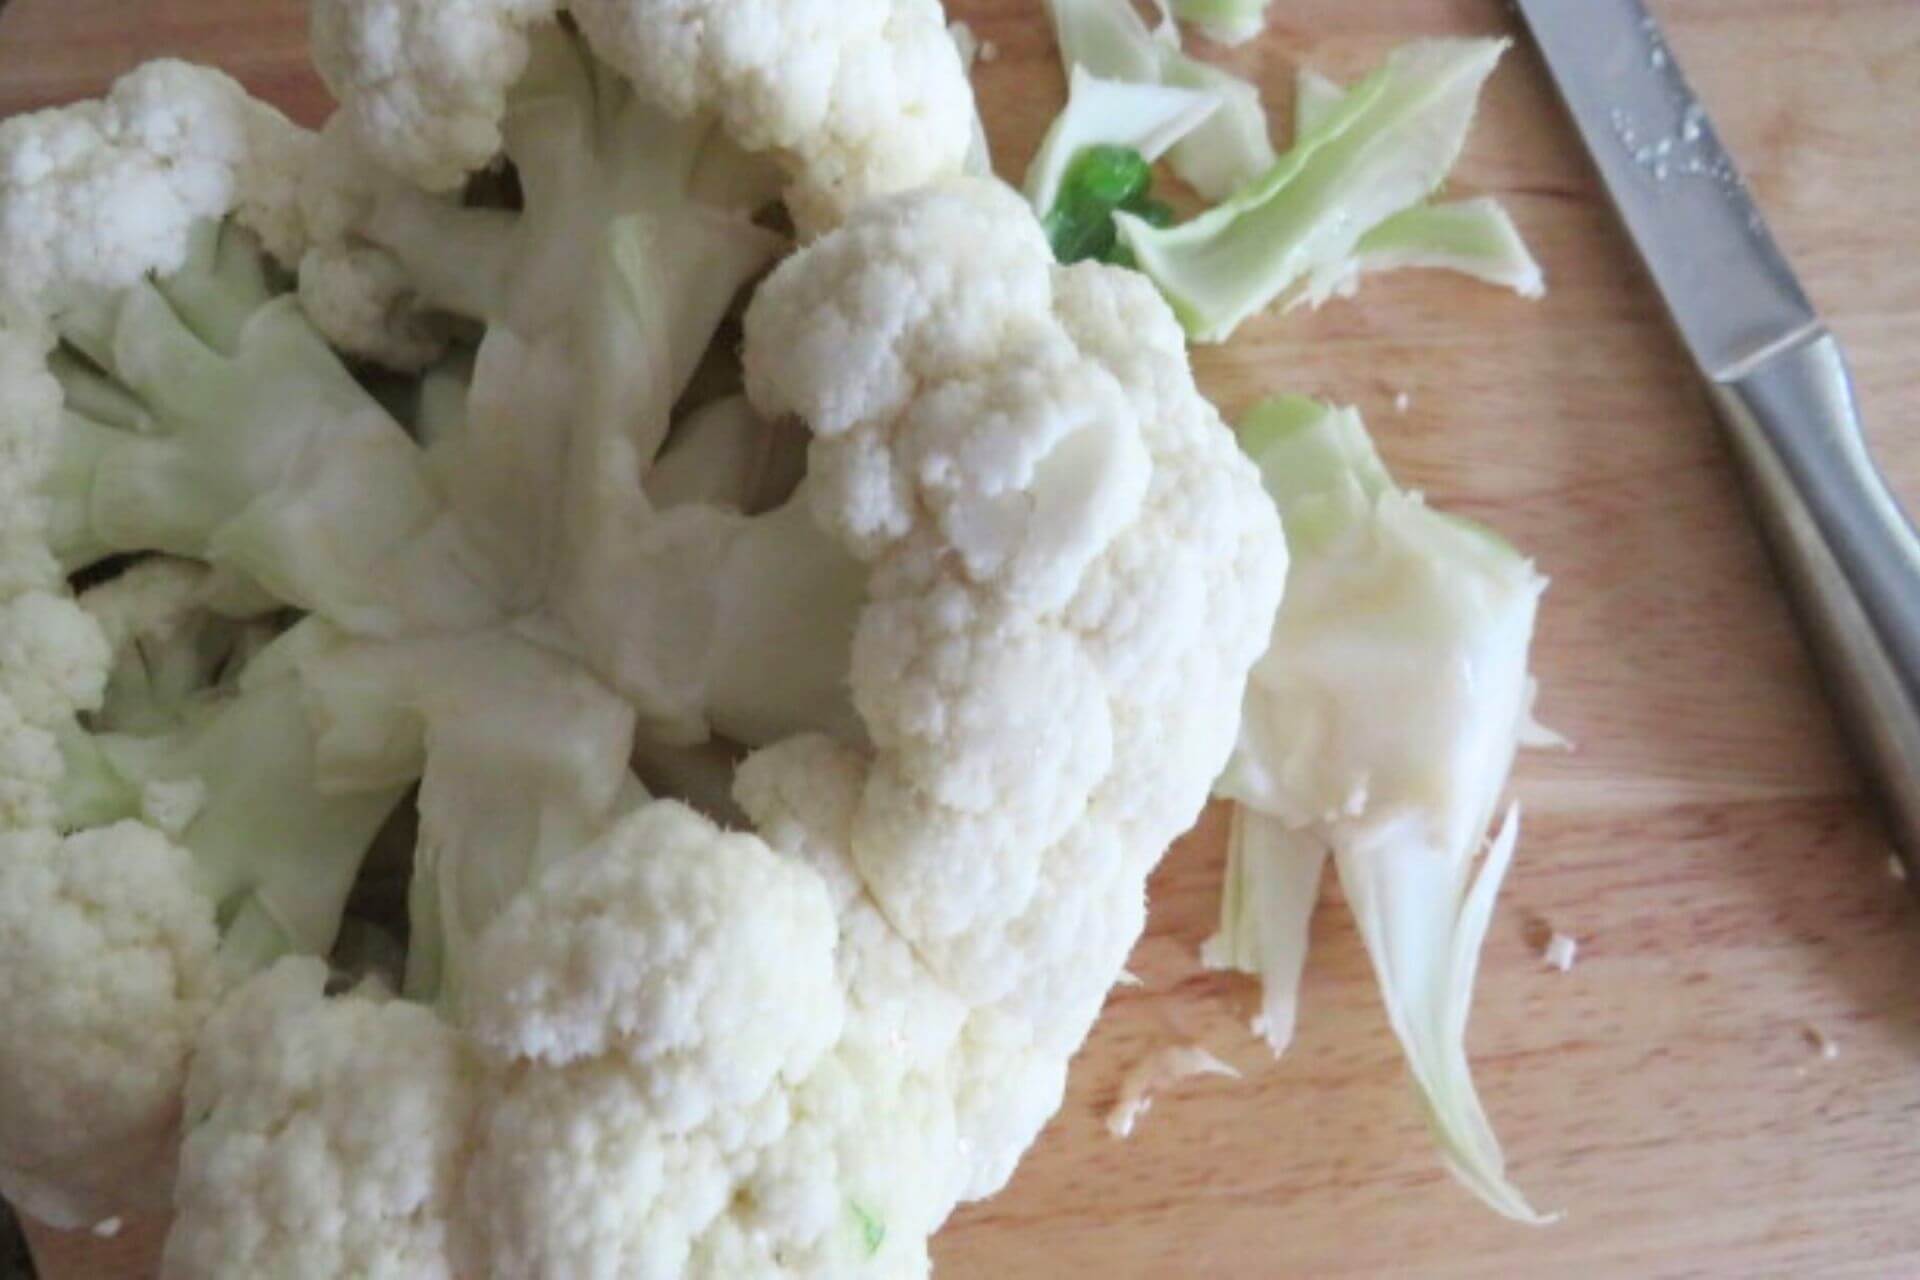 cleaned cauliflower without the core